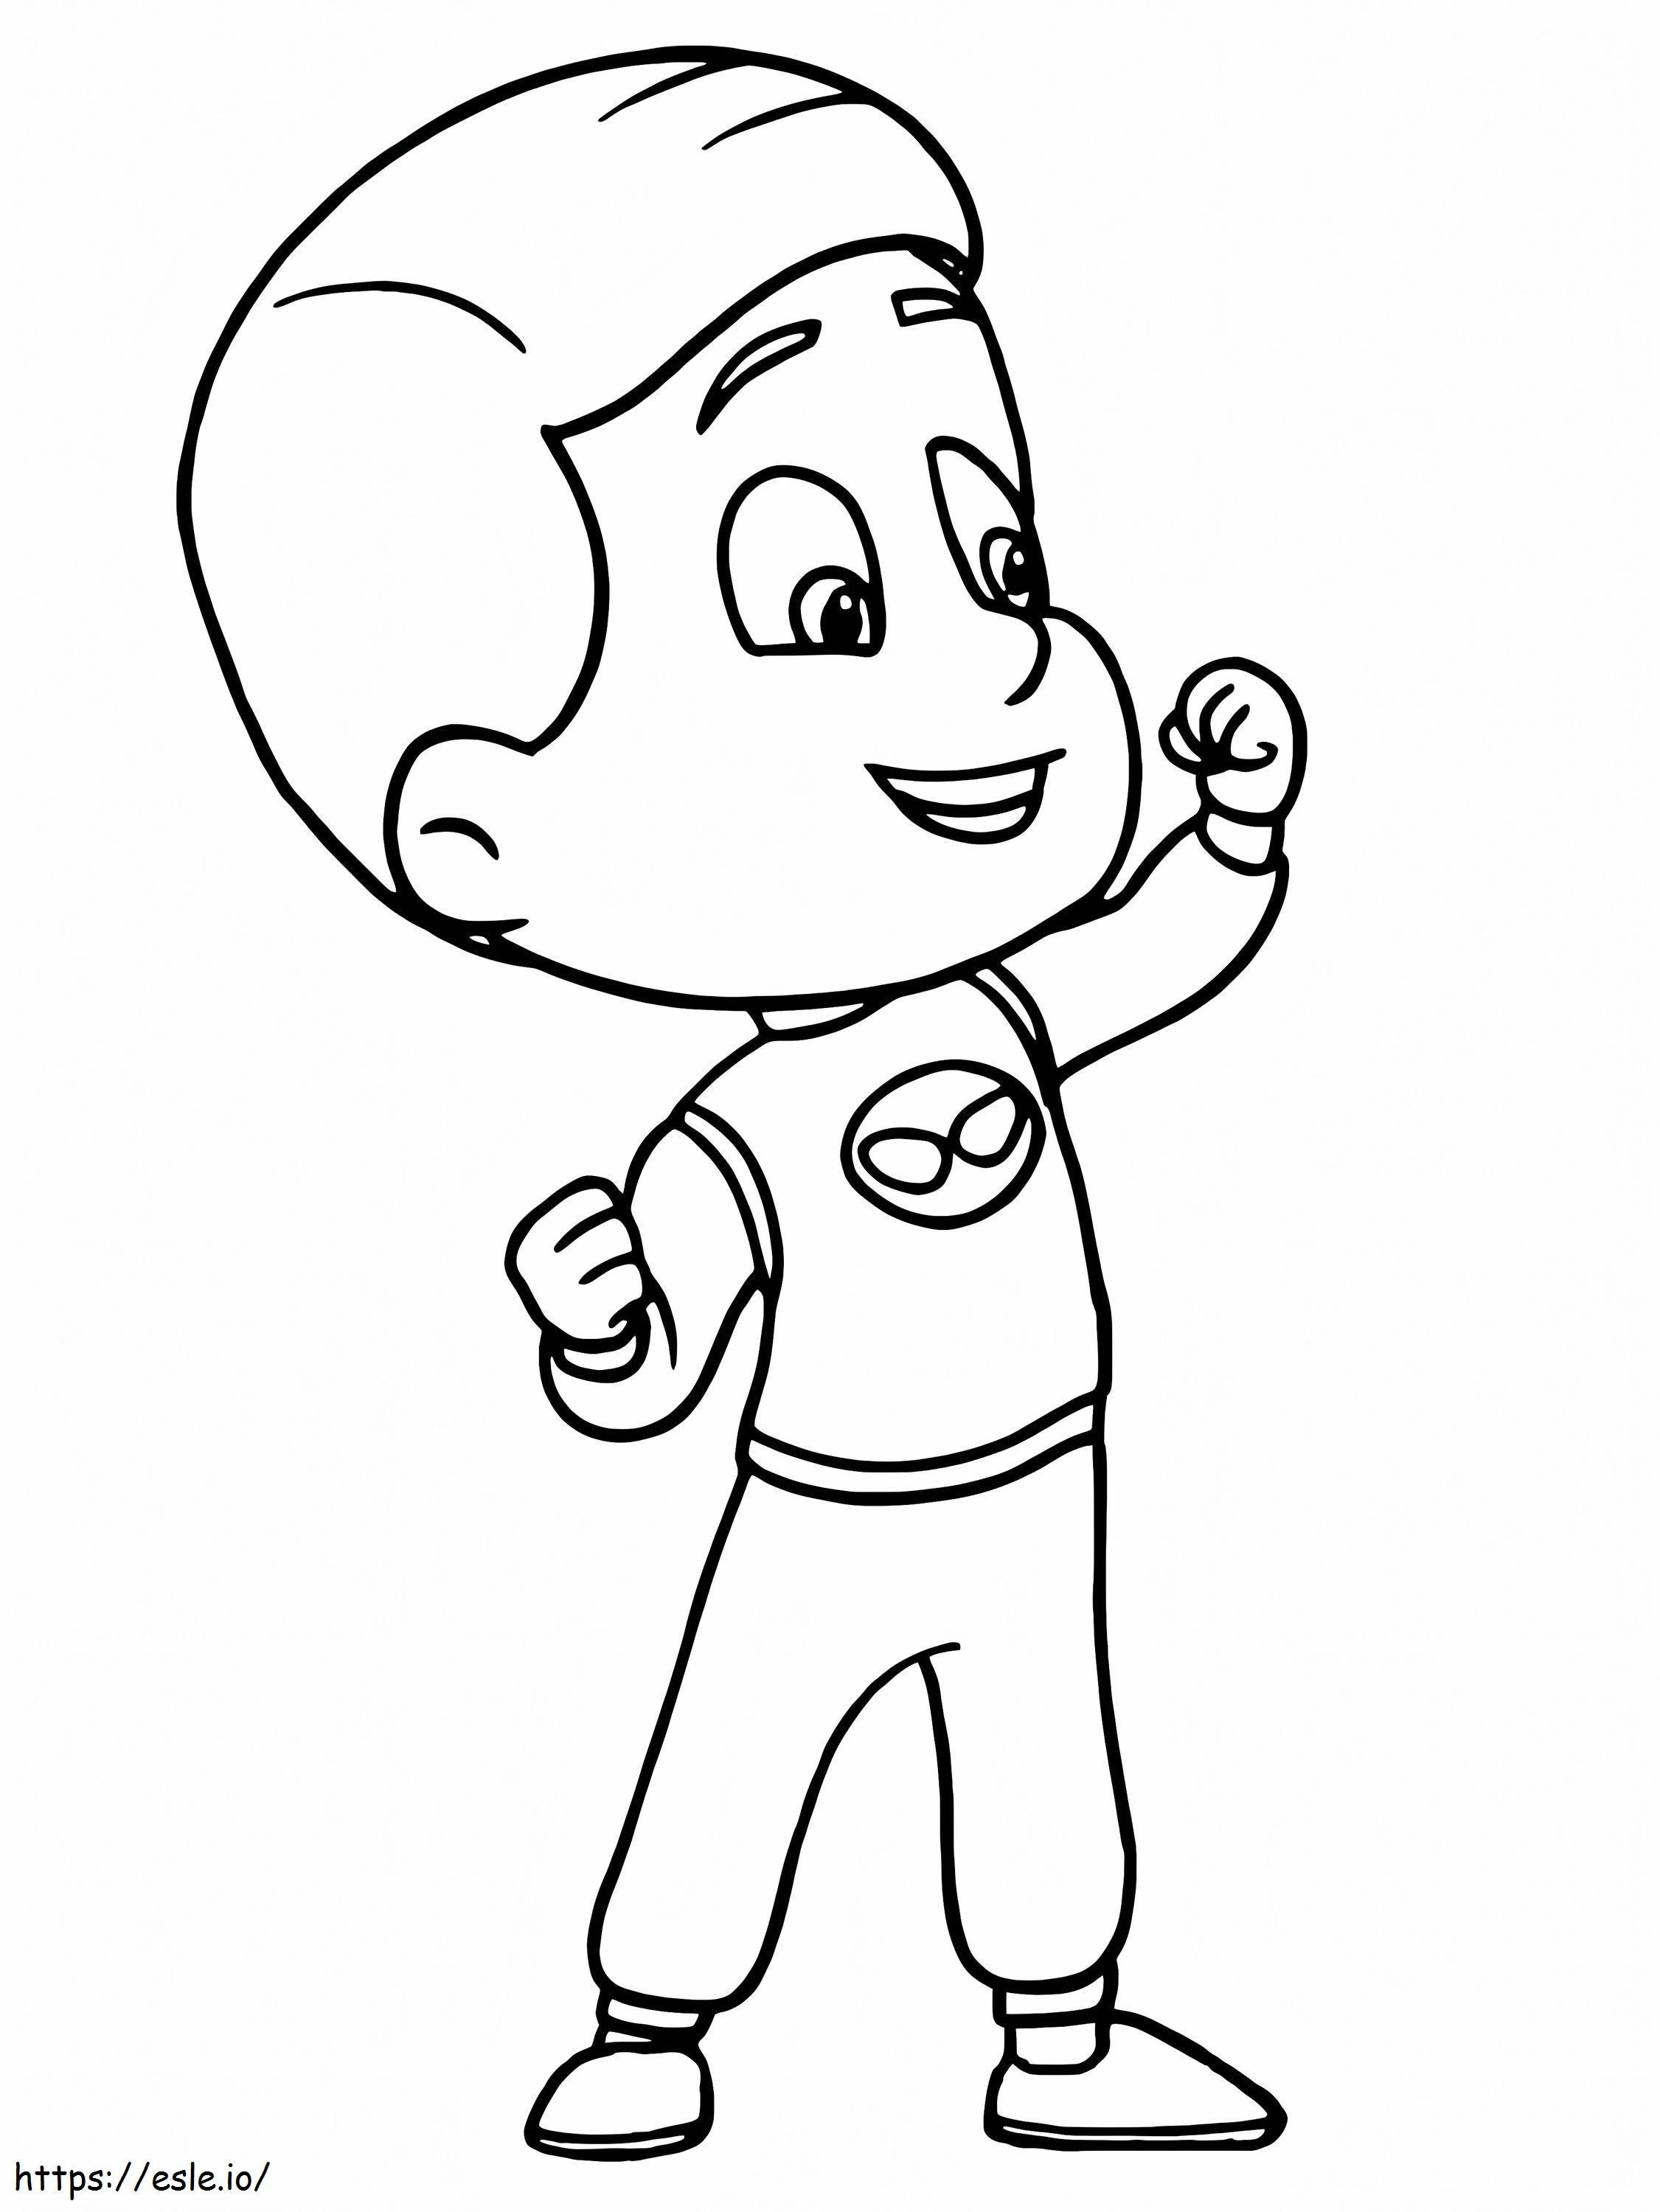 Greg From PJ Masks coloring page